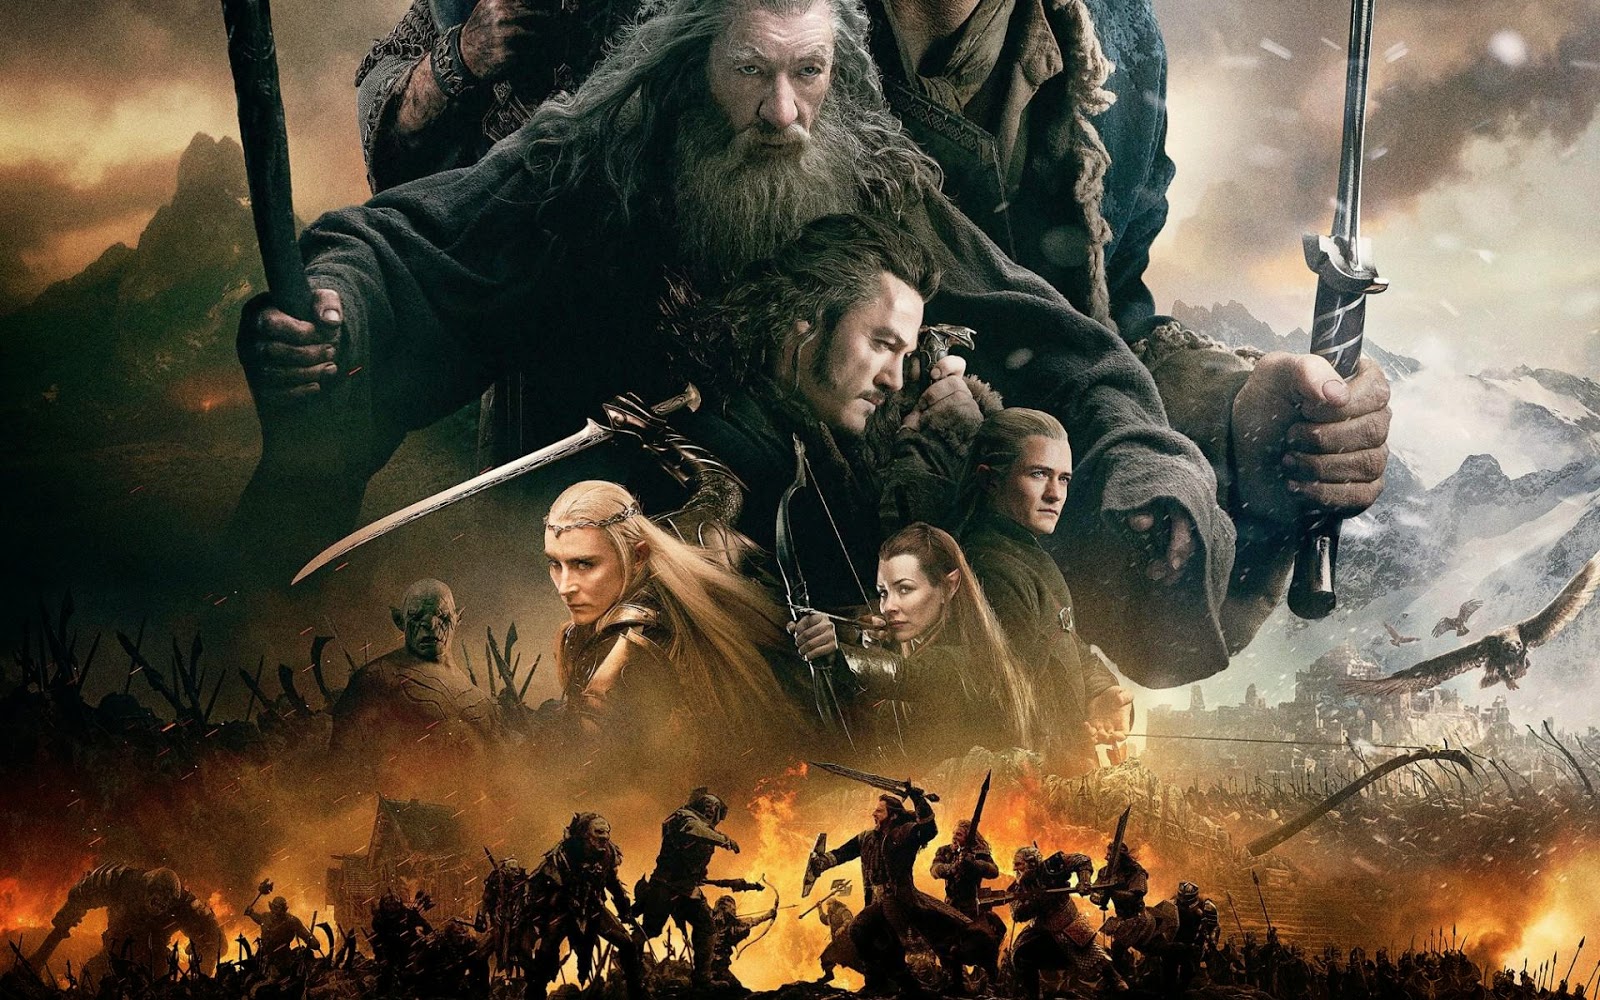 Download The Hobbit The Desolation of Smaug wallpaper